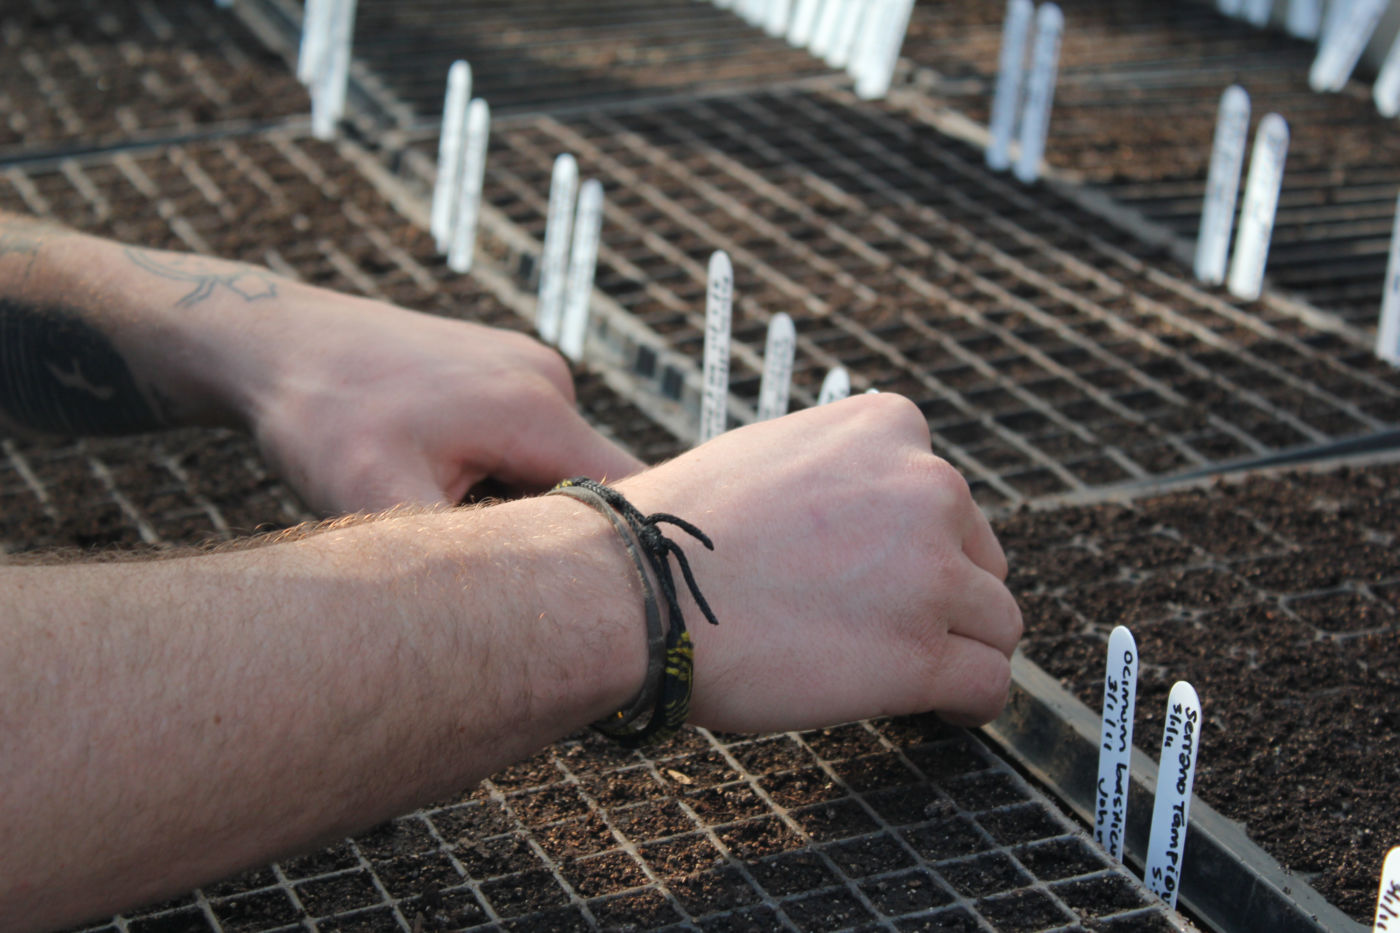 Planting seeds in small-celled seed trays on a propagation bench with bottom heat.